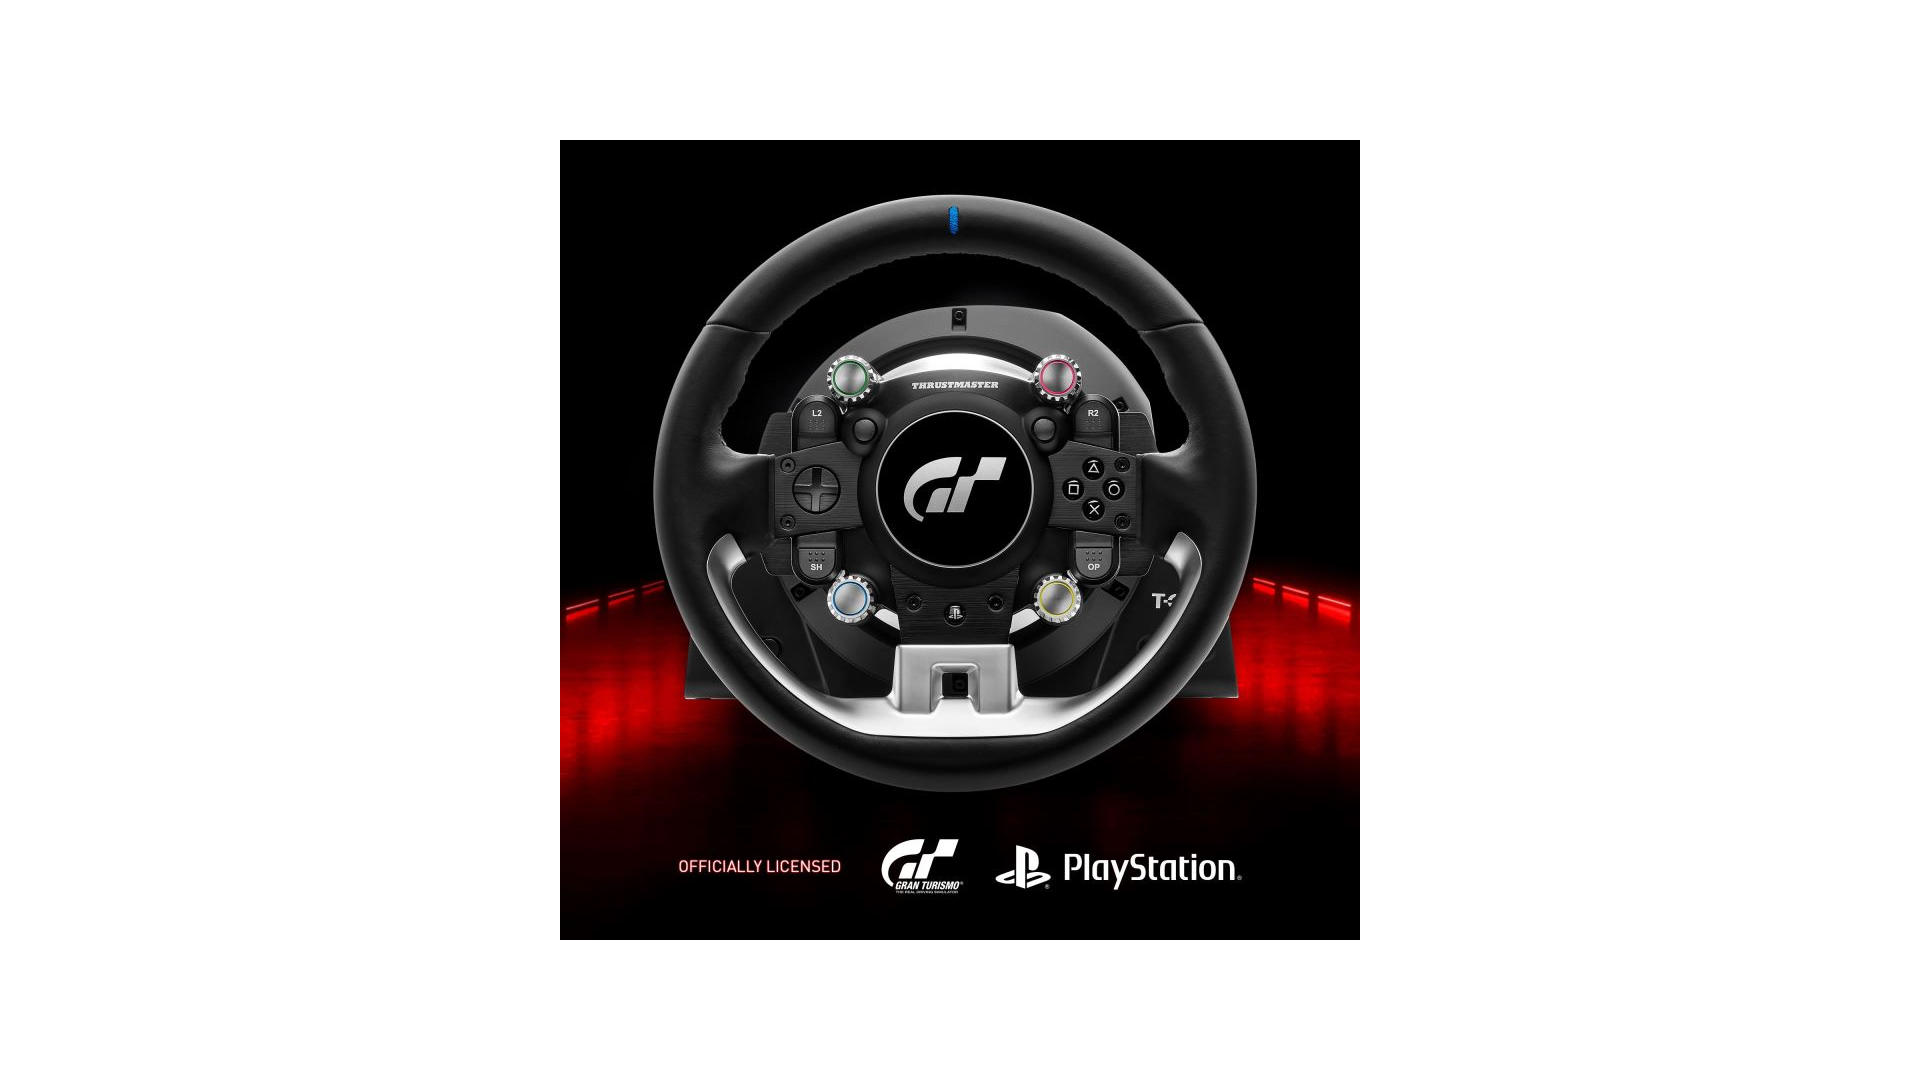 Volante+Pedales Thrustmaster T-GT II PC PS4 PS5